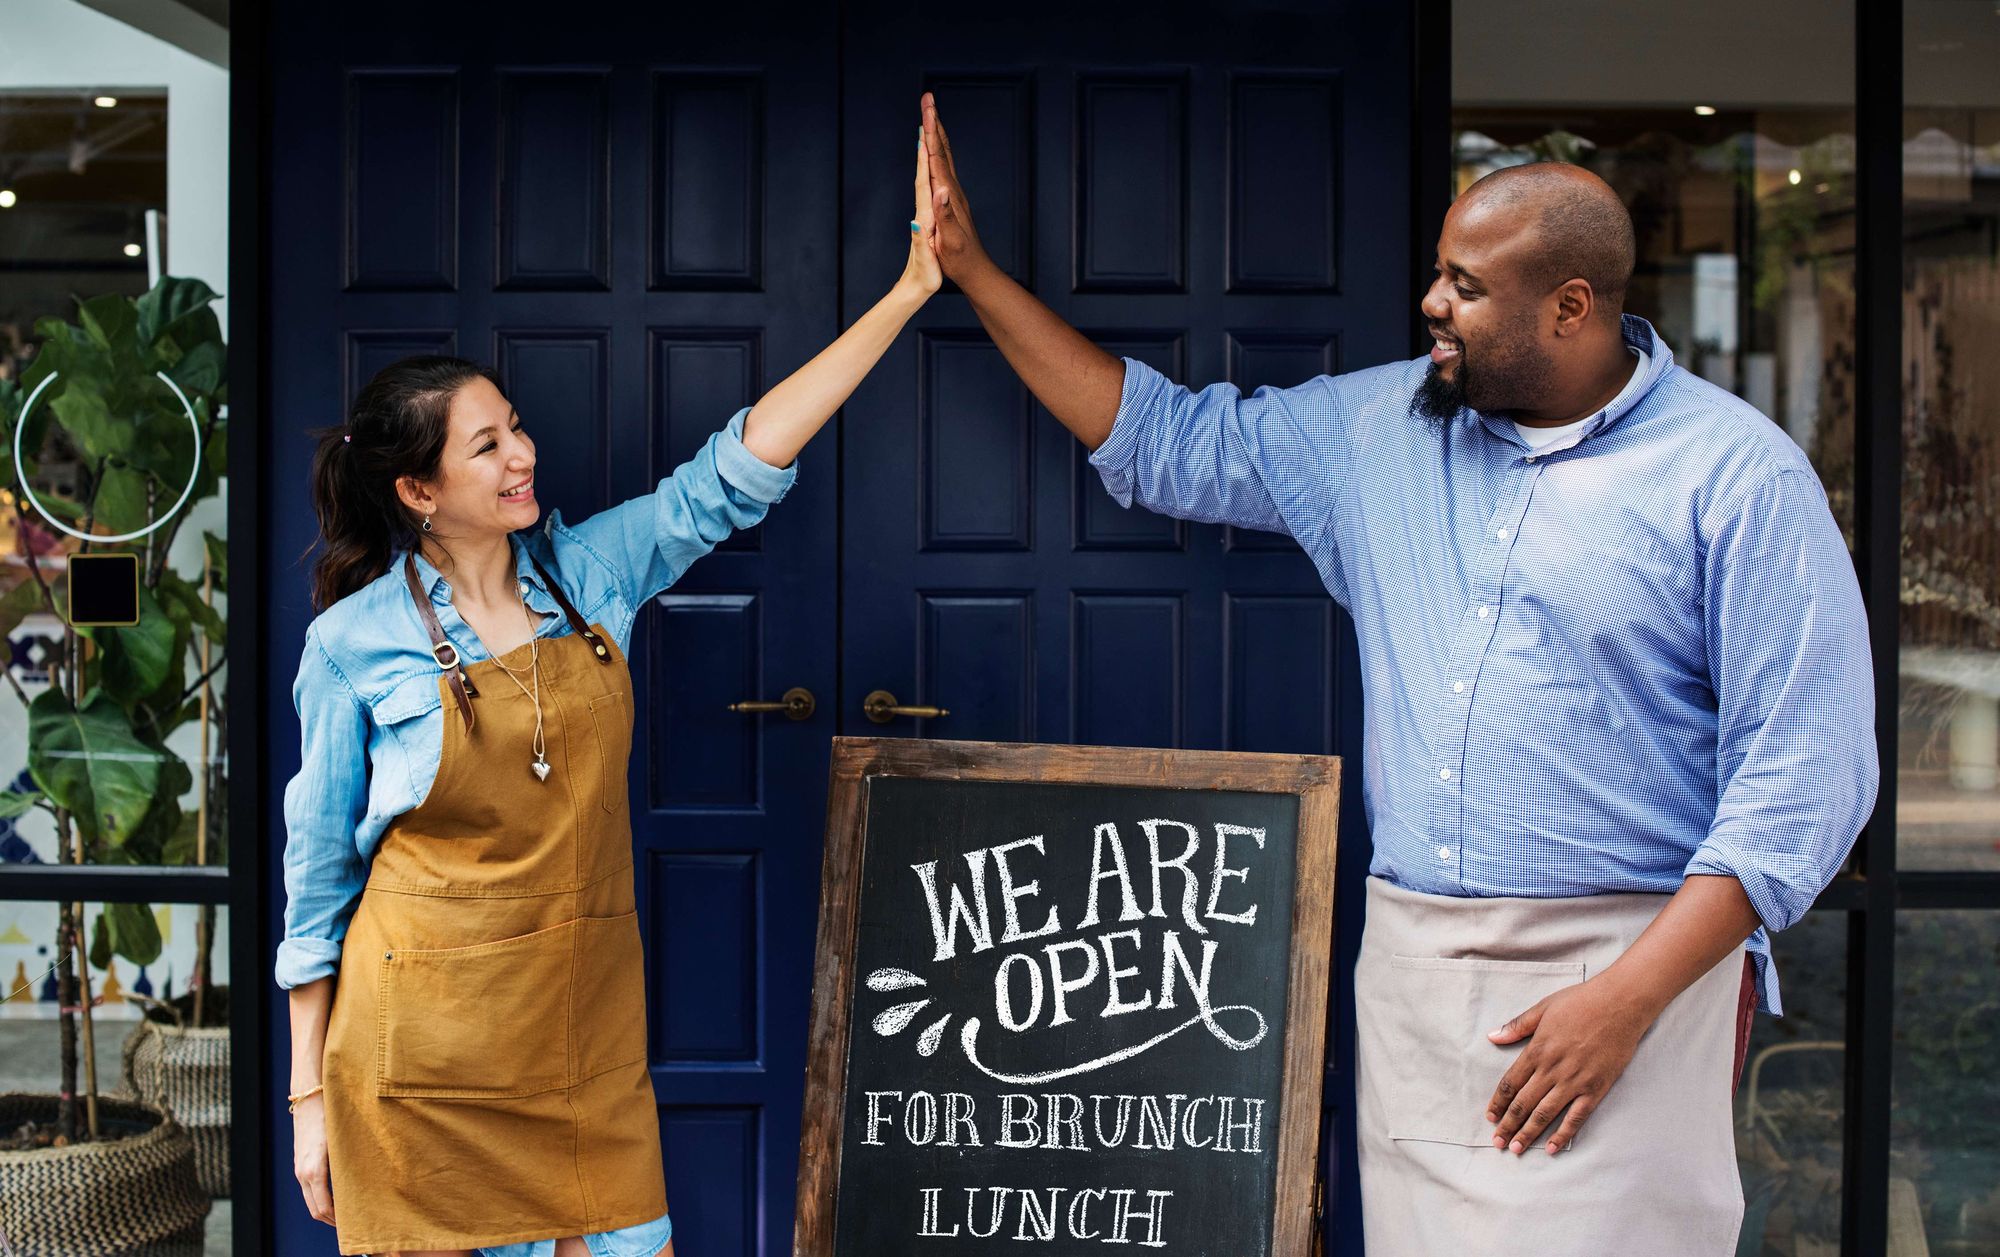 Two employees give high fives in front of a sign that says "We are Open"